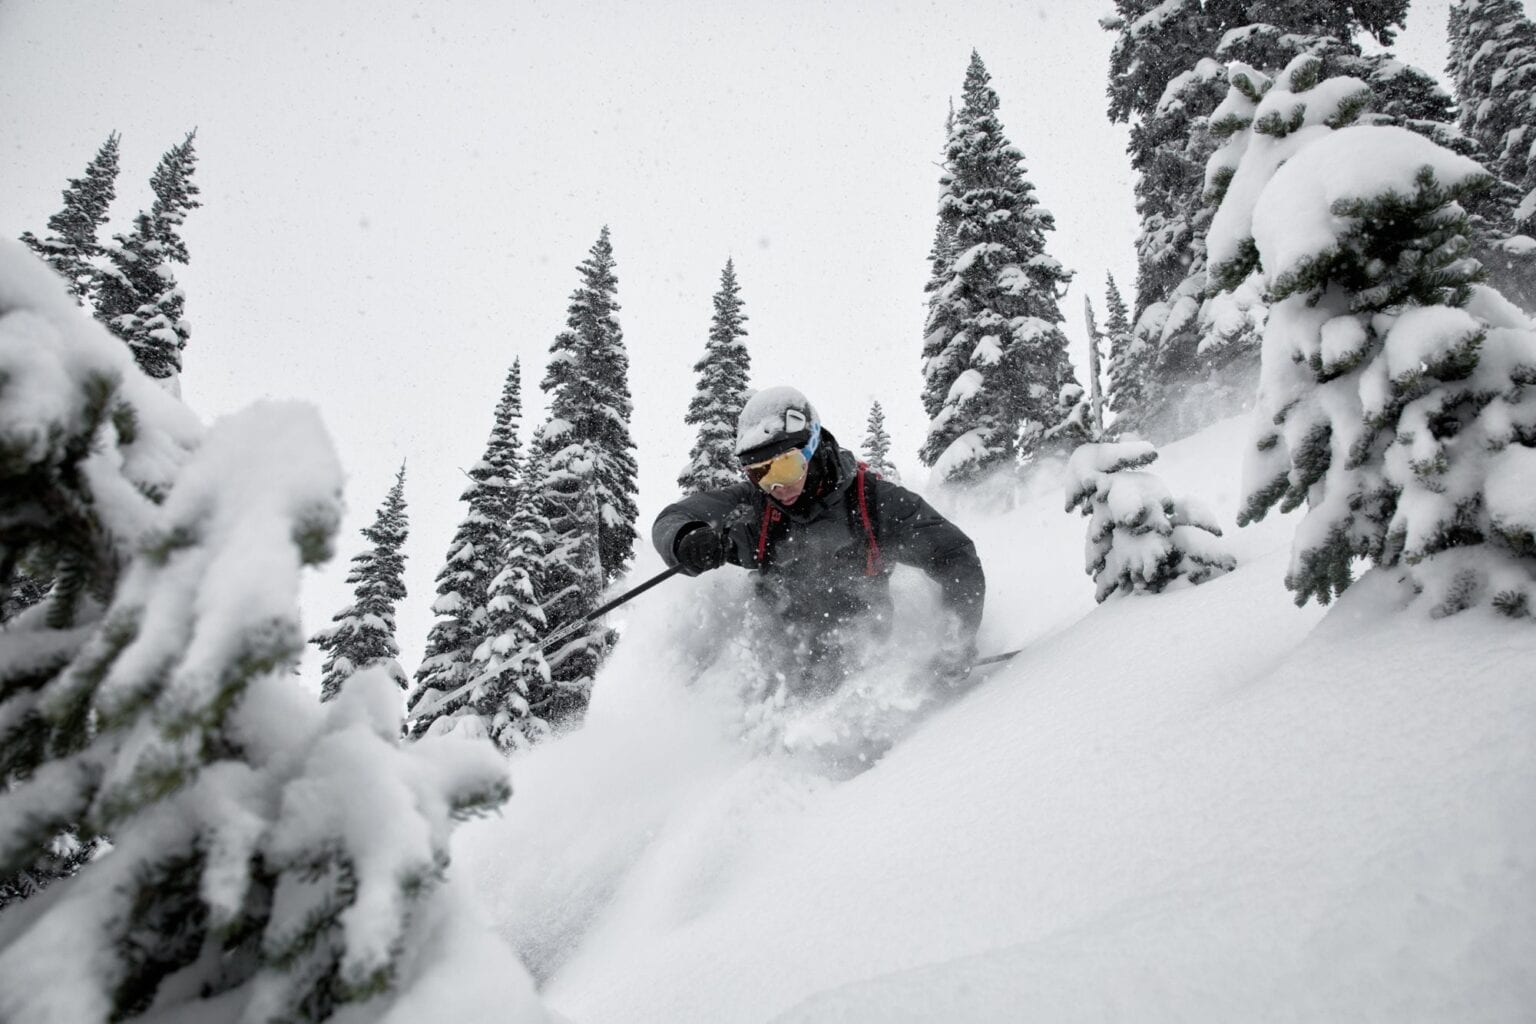 skier making a turn in deep powder snow surrounded by trees